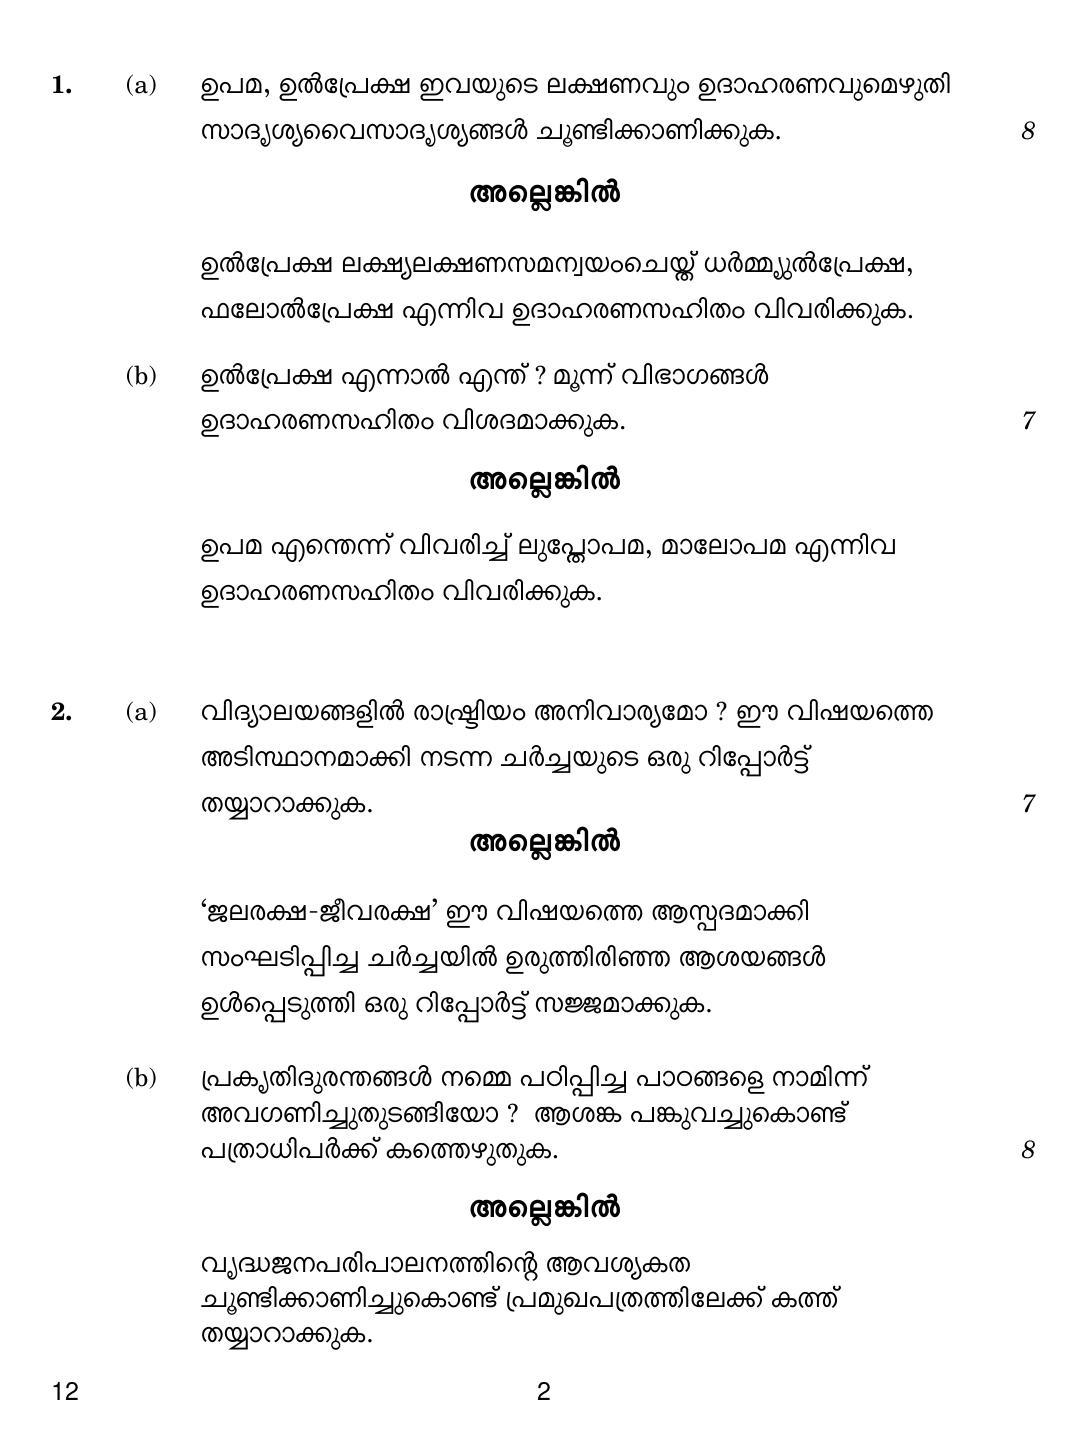 CBSE Class 12 12 Malayalam 2019 Compartment Question Paper - Page 2